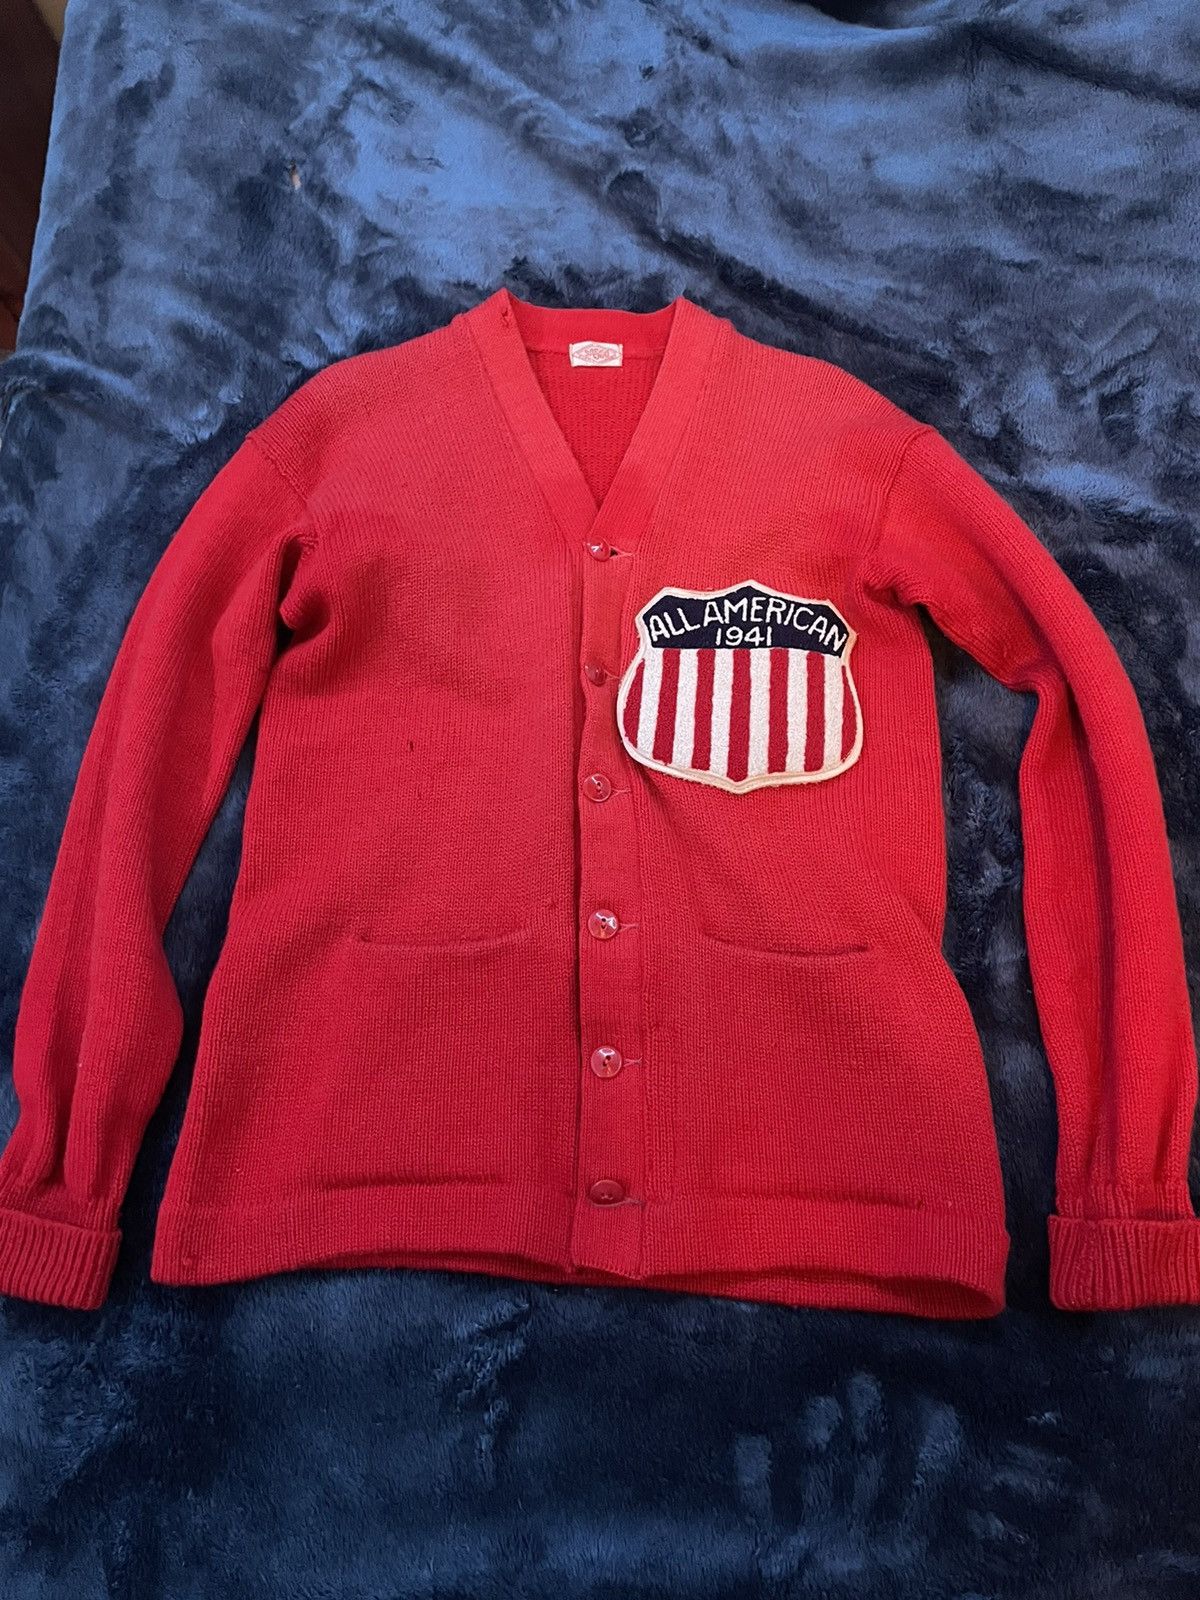 Vintage Vintage 1941 all American wool knit cardigan Size US L / EU 52-54 / 3 - 2 Preview